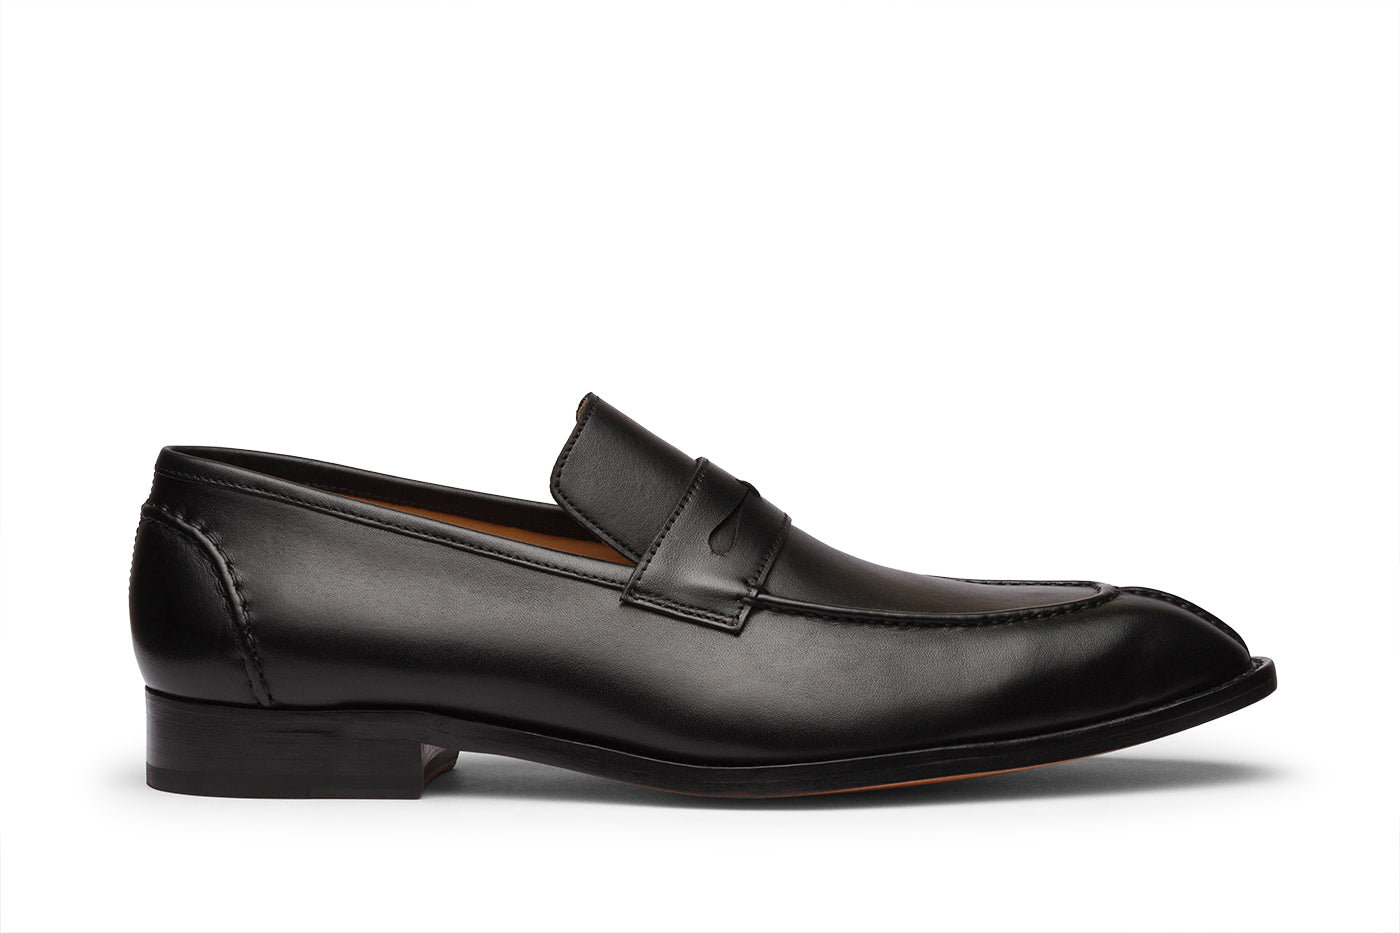 Penny loafer with hand cording on the vamp, toe and back counter